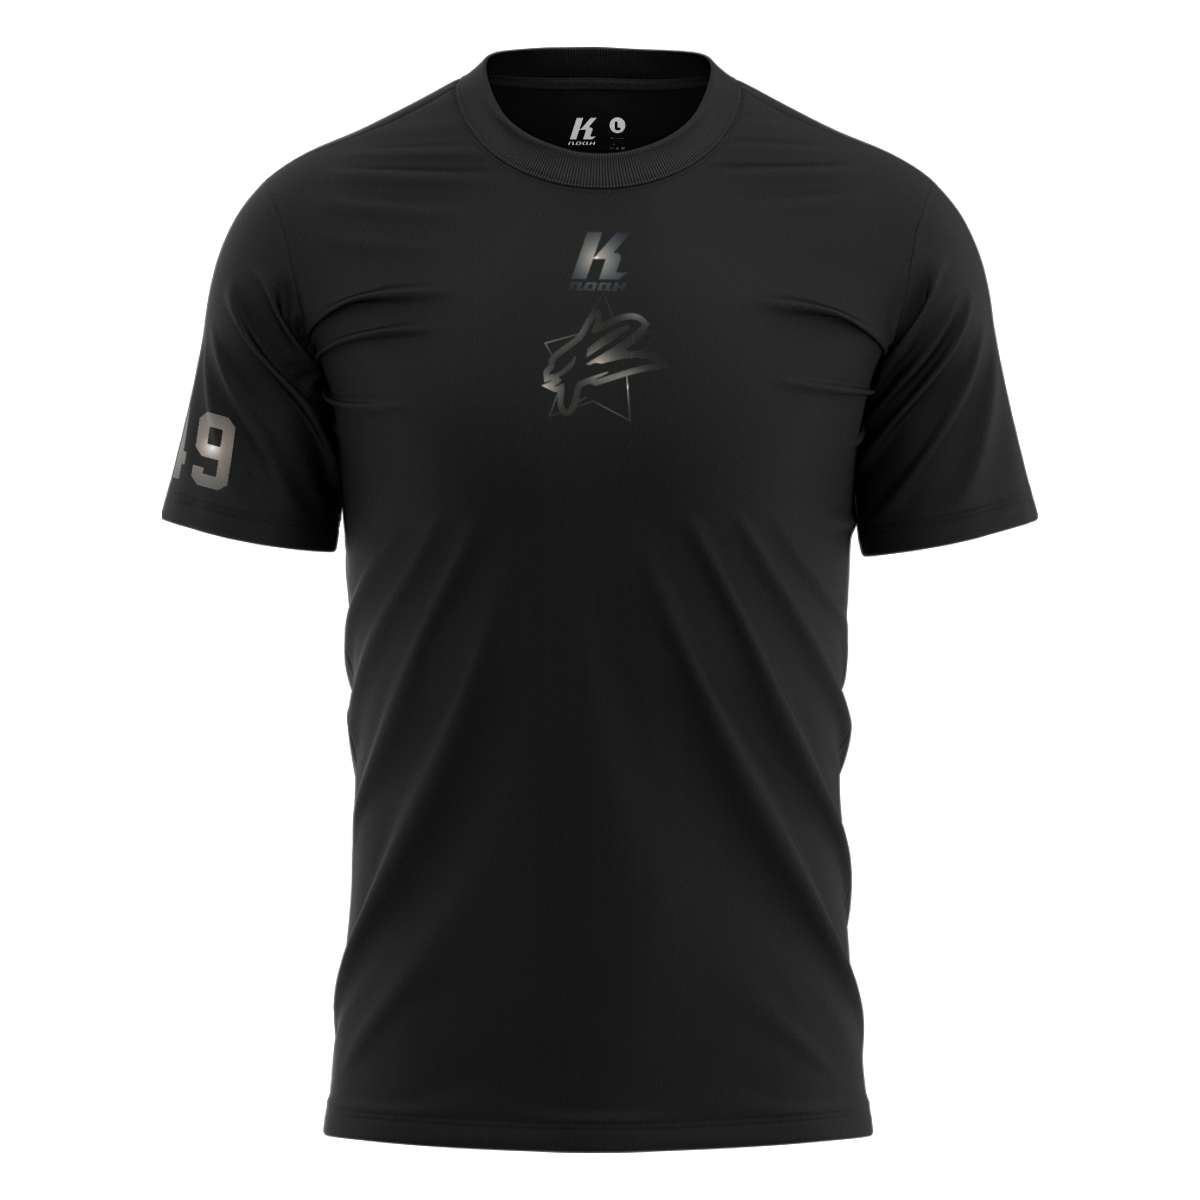 Rebels "Blackline" K.Tech Sports Tee S8000 with Playernumber/Initials